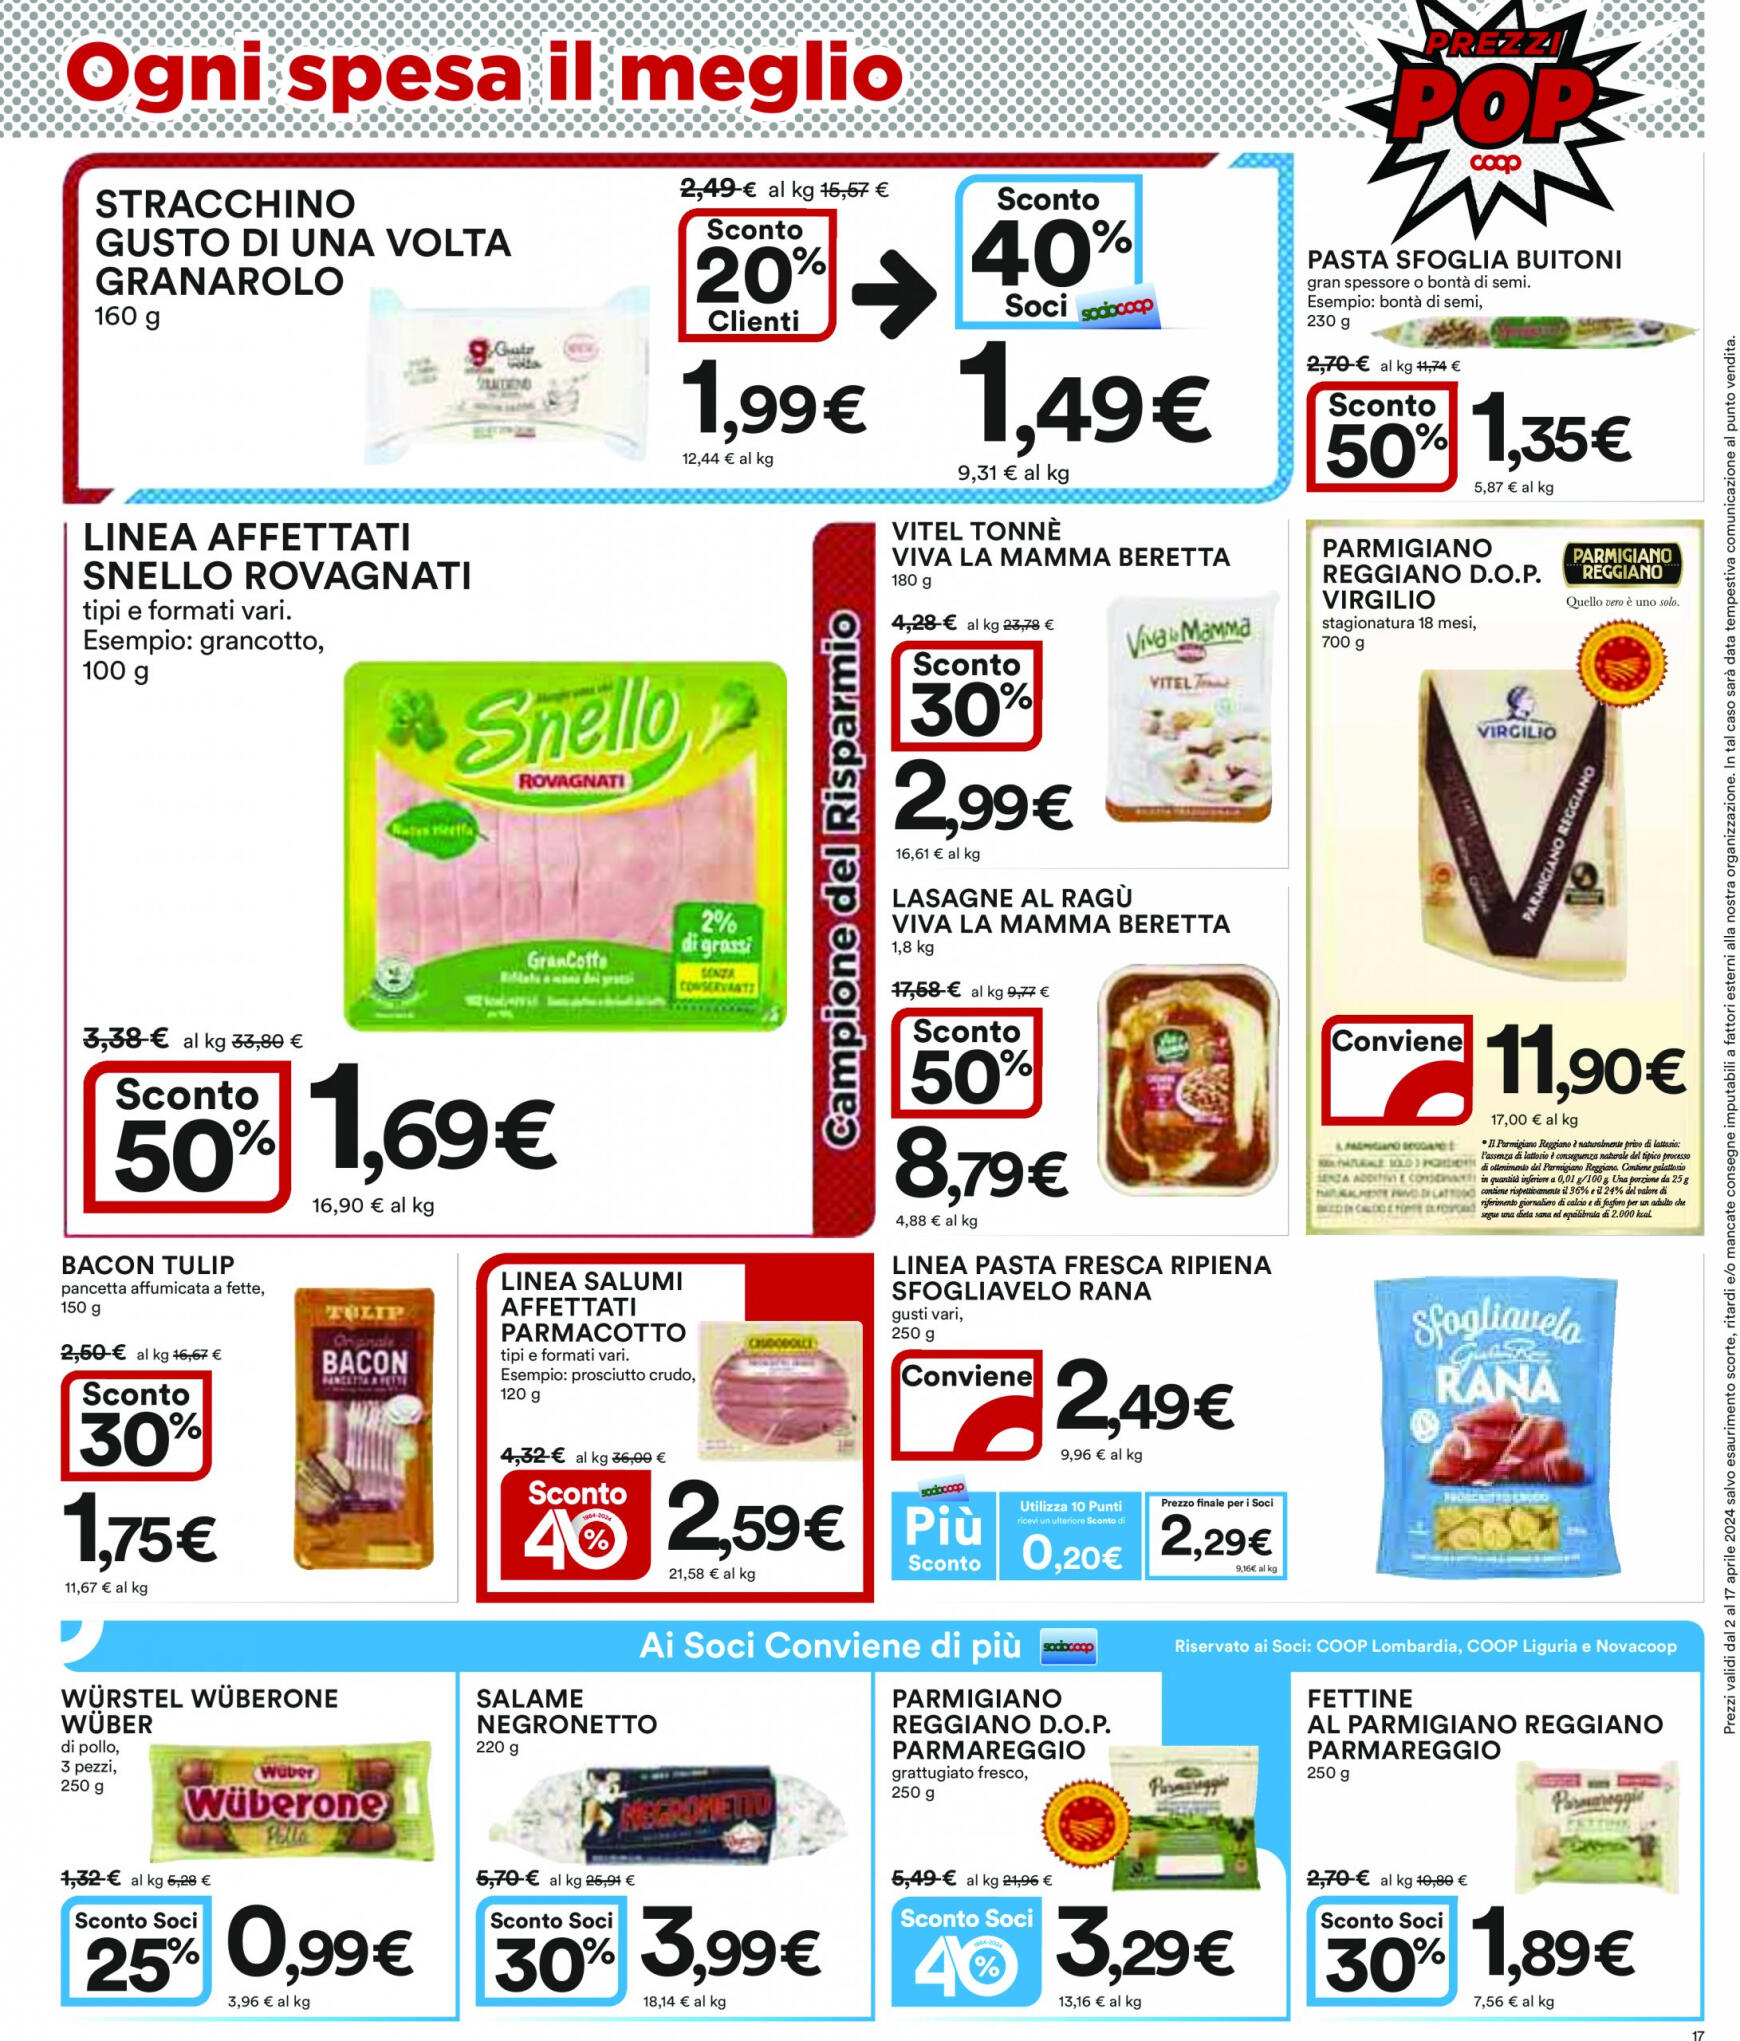 coop - Nuovo volantino Coop 02.04. - 17.04. - page: 17